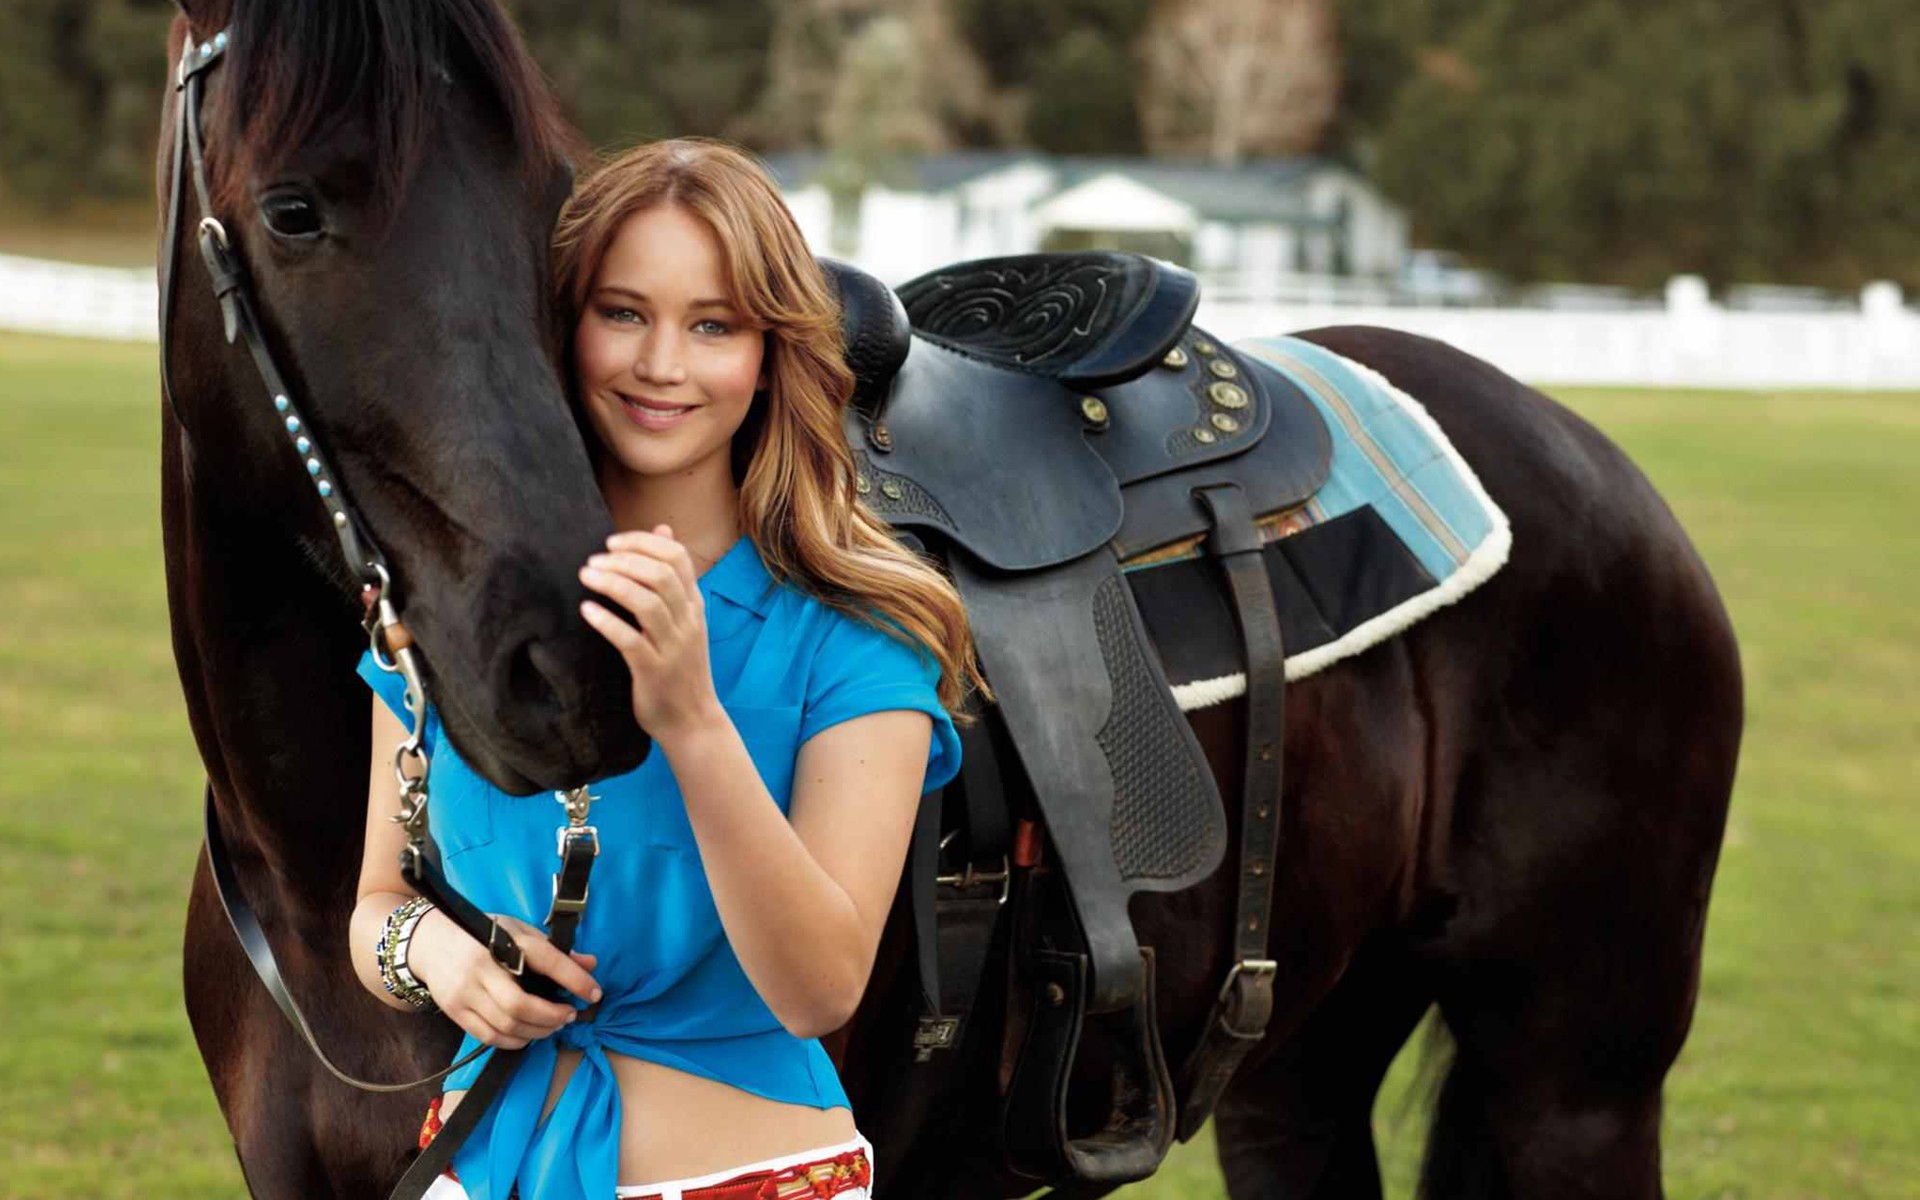 blondes, Women, Actress, Animals, People, Horses, Jennifer, Lawrence, Blue, Dress, Girls, With, Horses Wallpaper